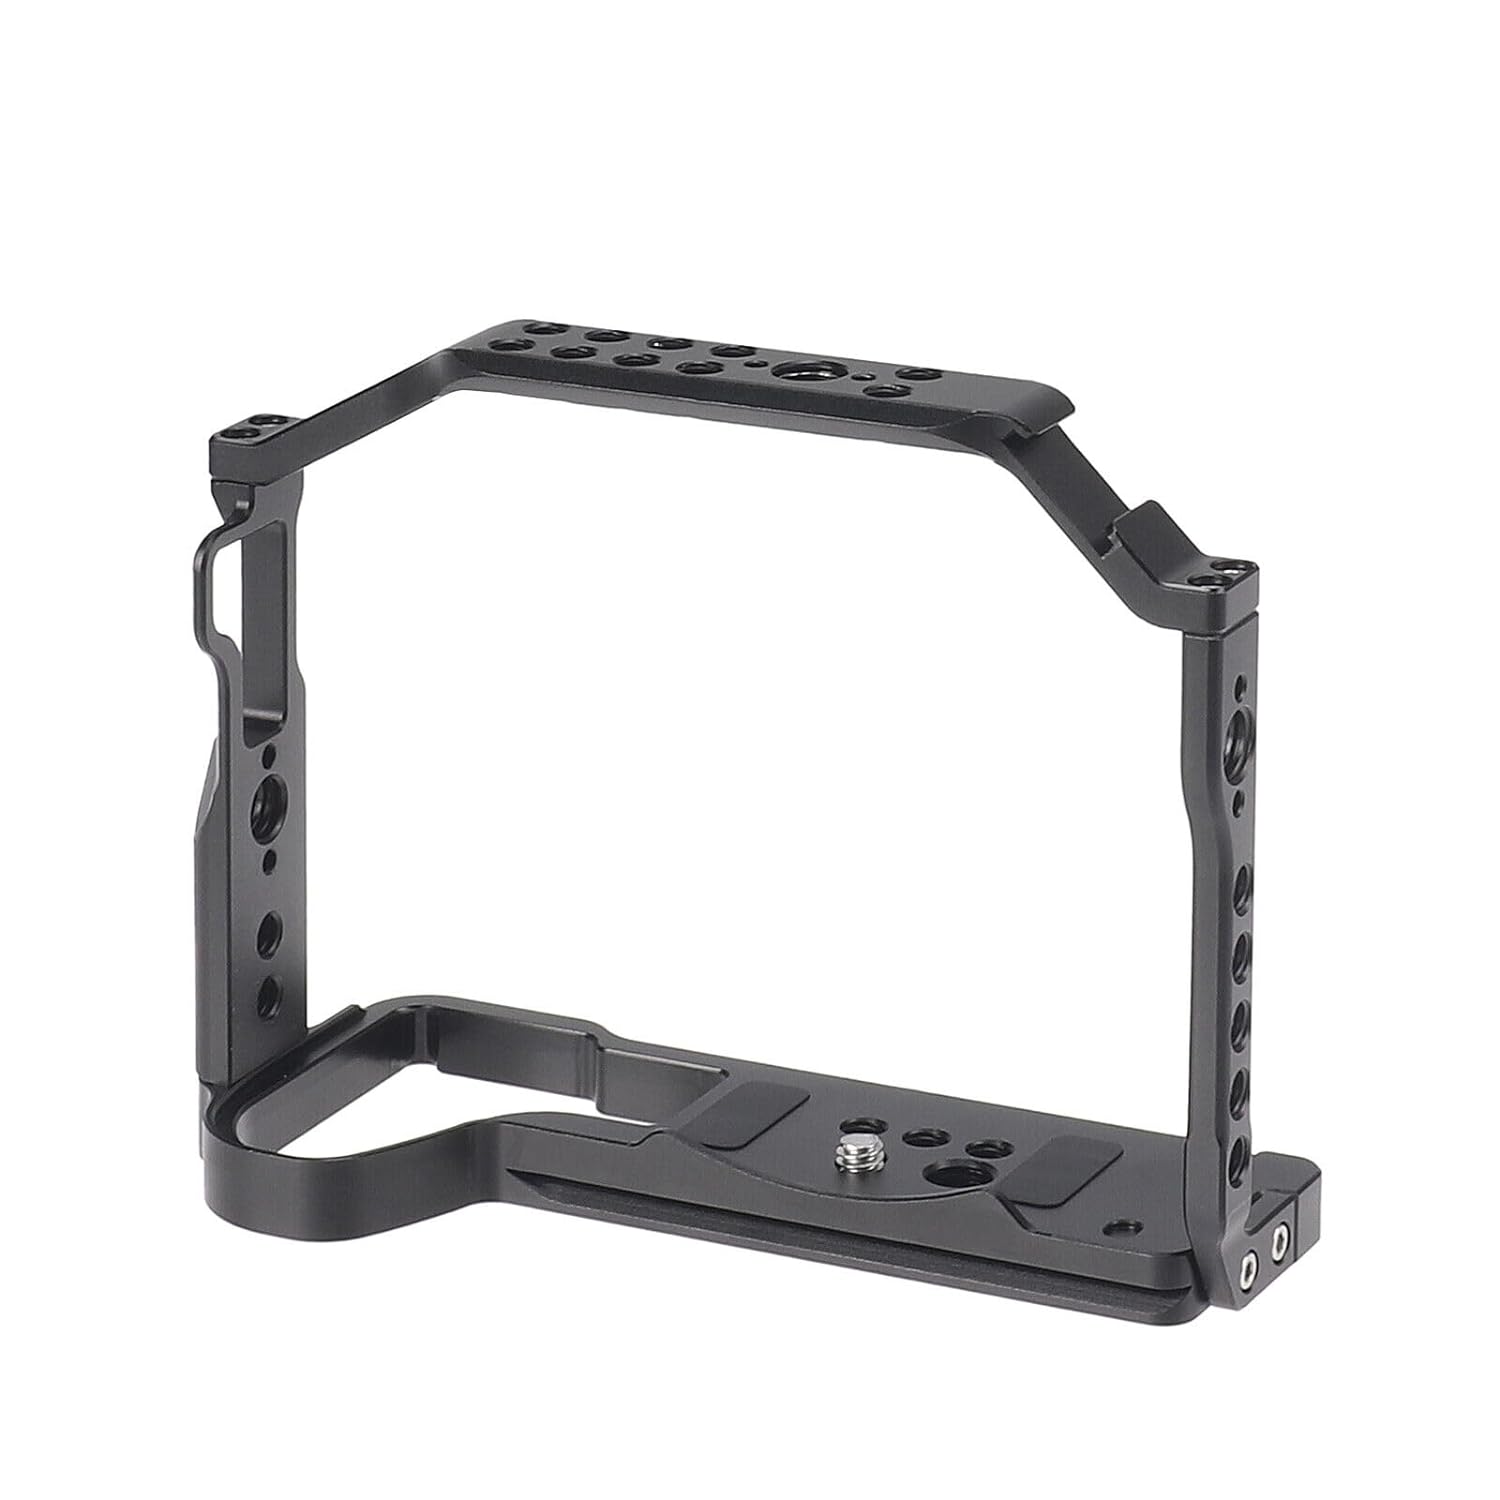 Digitek Cam Cage for (P) S5II/S52 Camera Aluminum Form-Fitted Cage with Quick Tripod Mounting